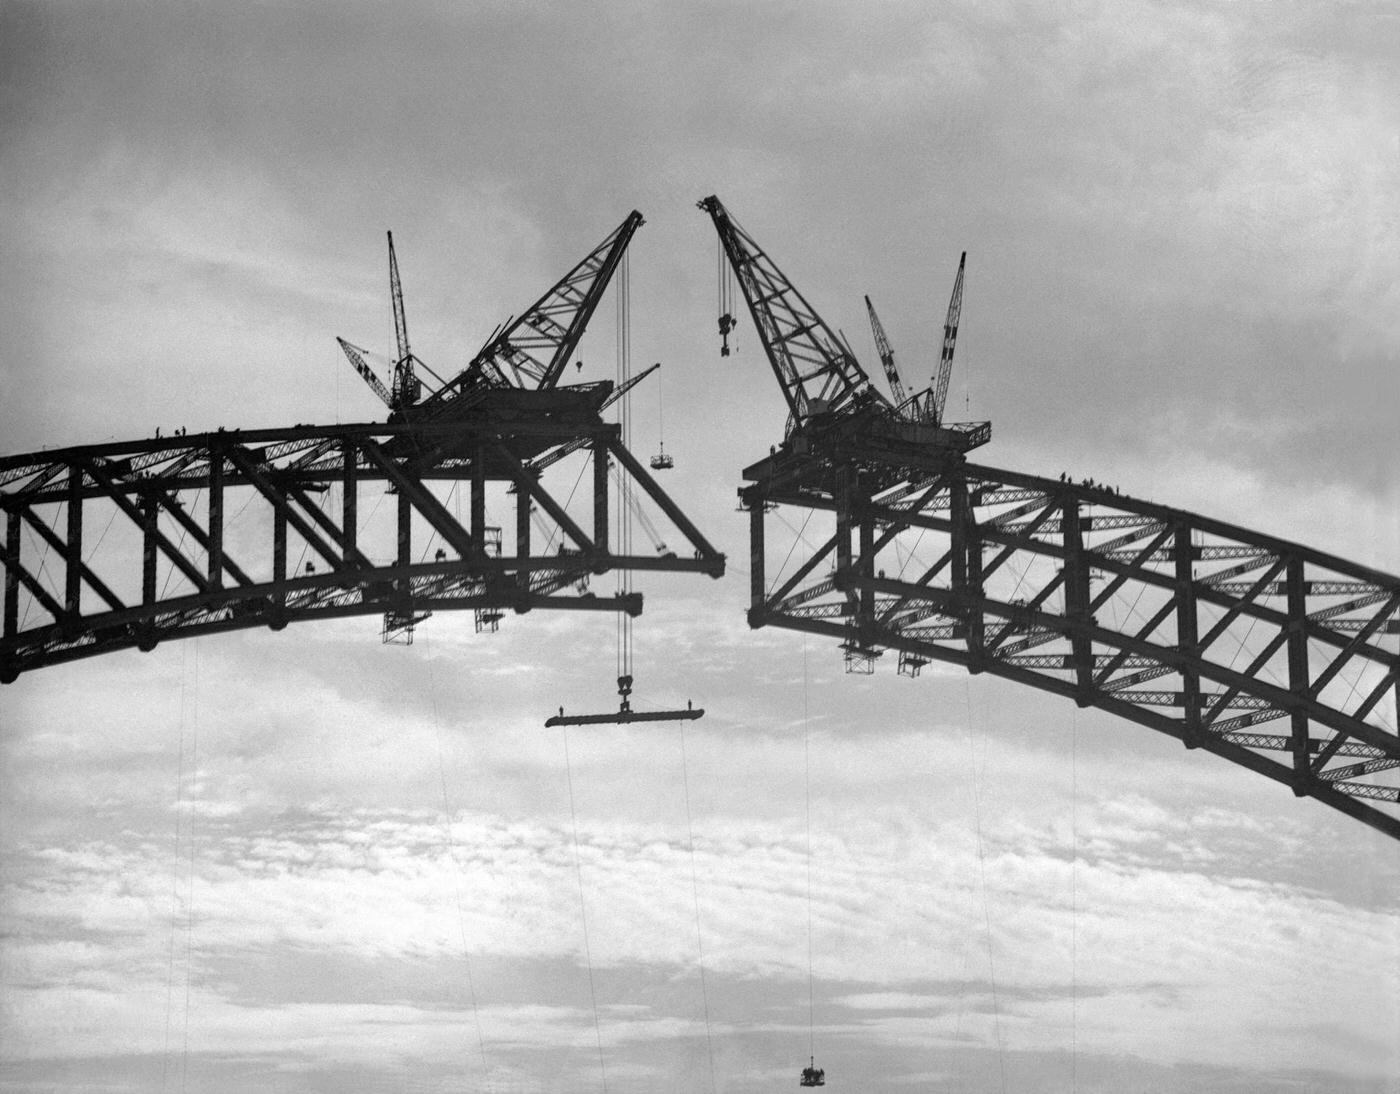 Construction on the Sydney Harbour, 1930